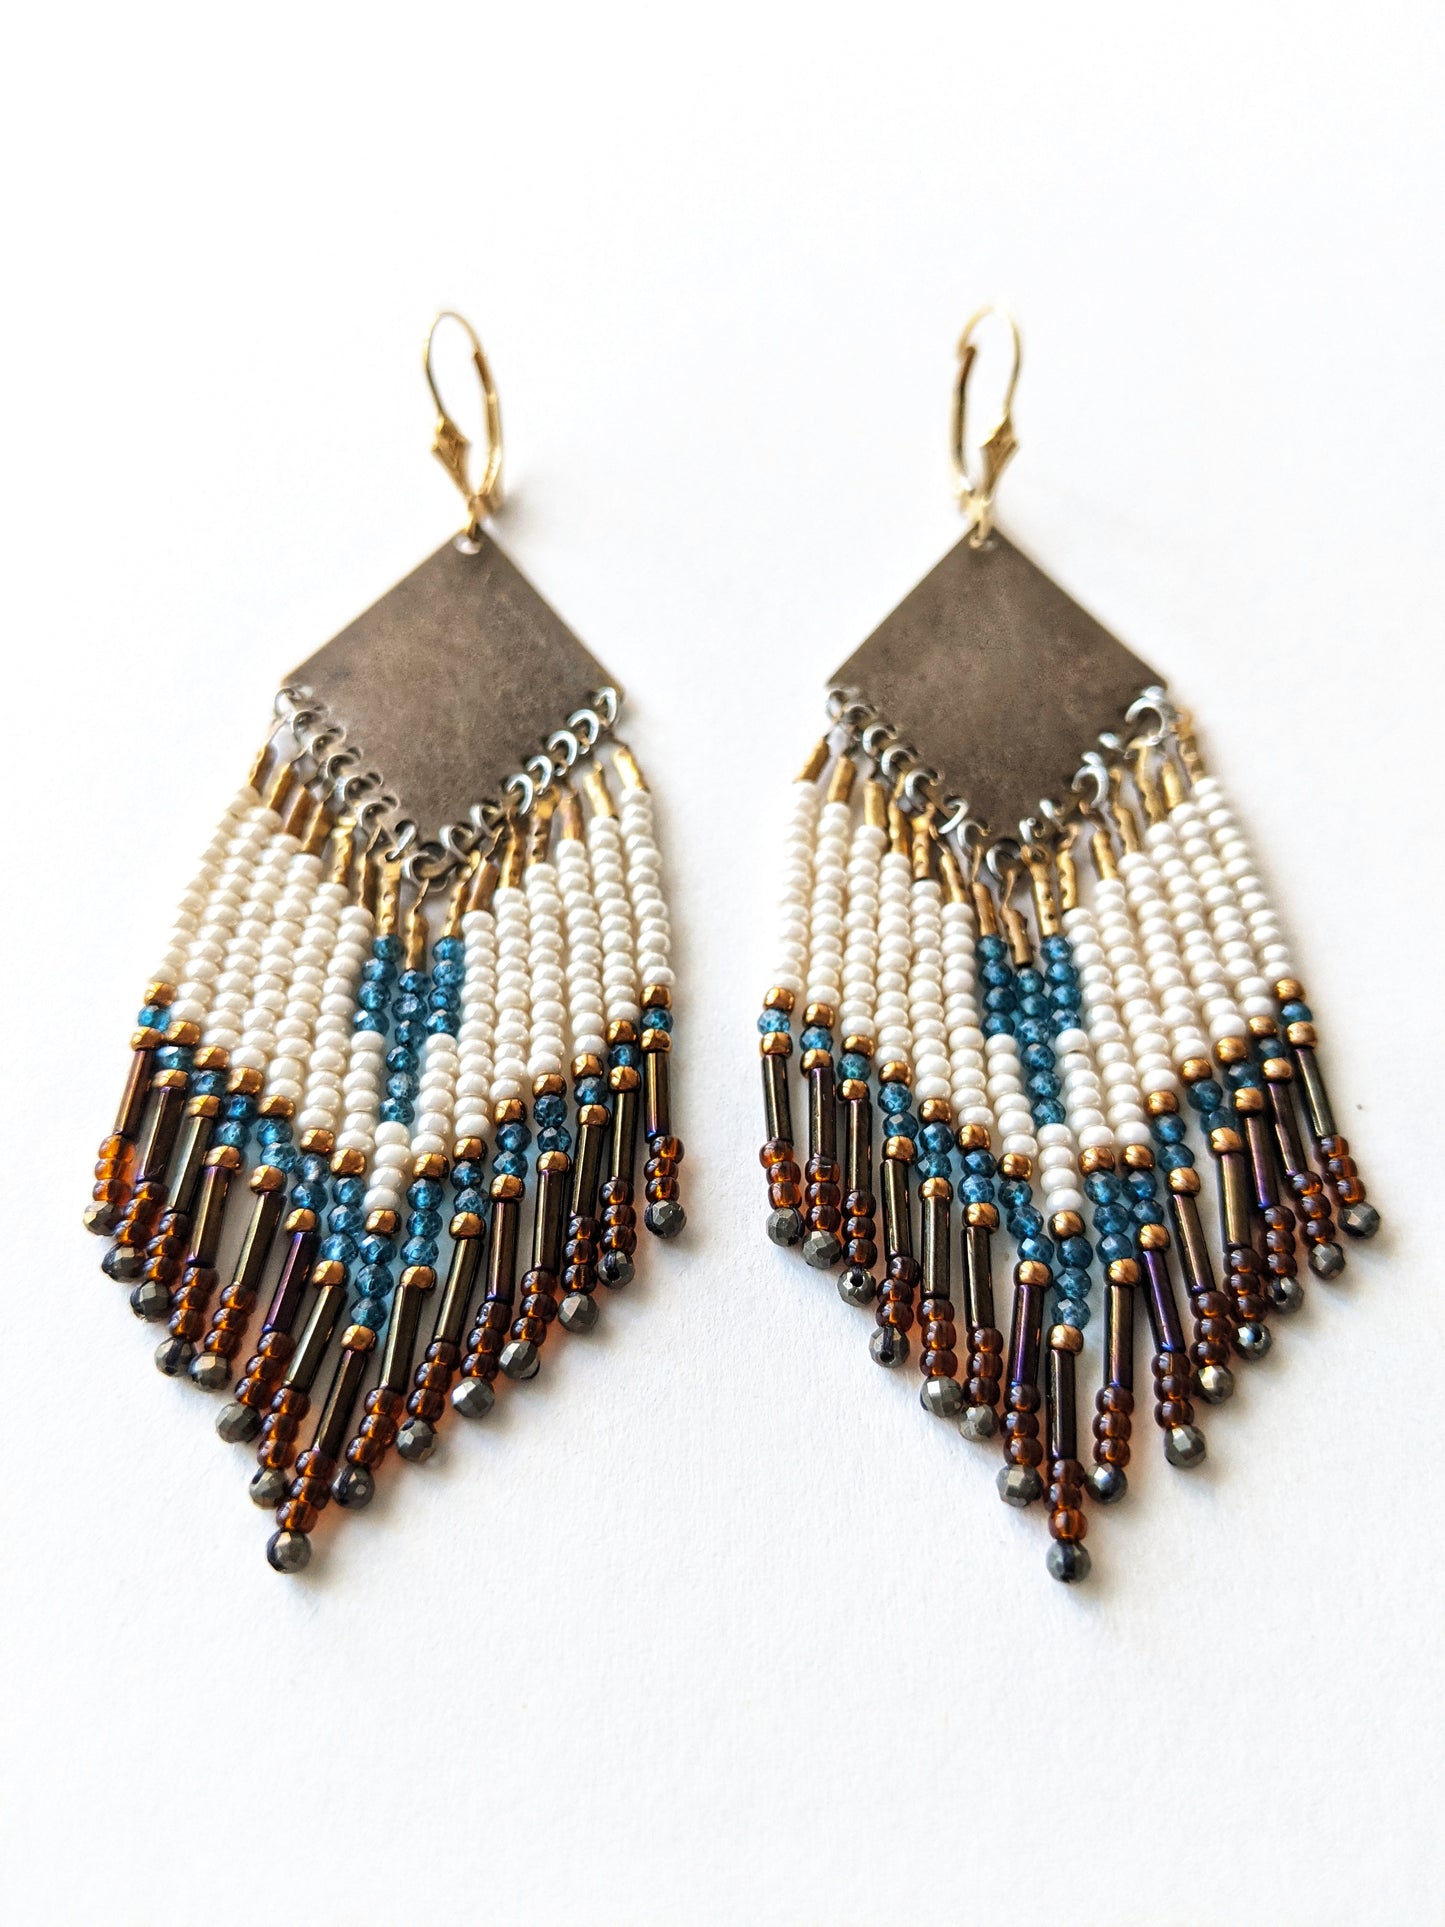 Moon & Milk - Handmade beaded fringe earrings created with pyrite stones, blue topaz, glass beads, brass, and sterling silver.